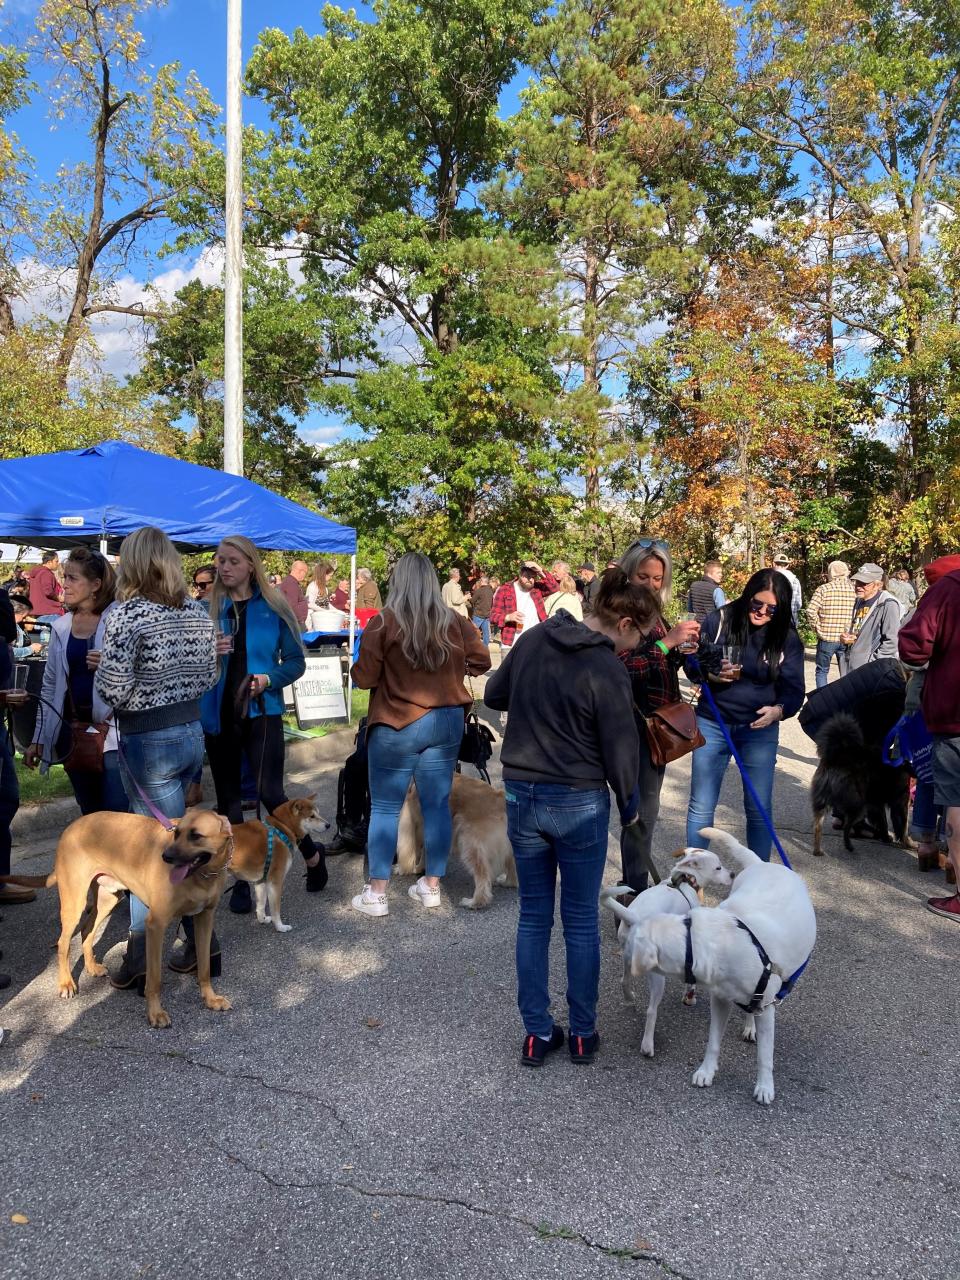 Dogs explore during the Growl-er Brewfest in Brighton on Sunday, Oct. 17, 2021.